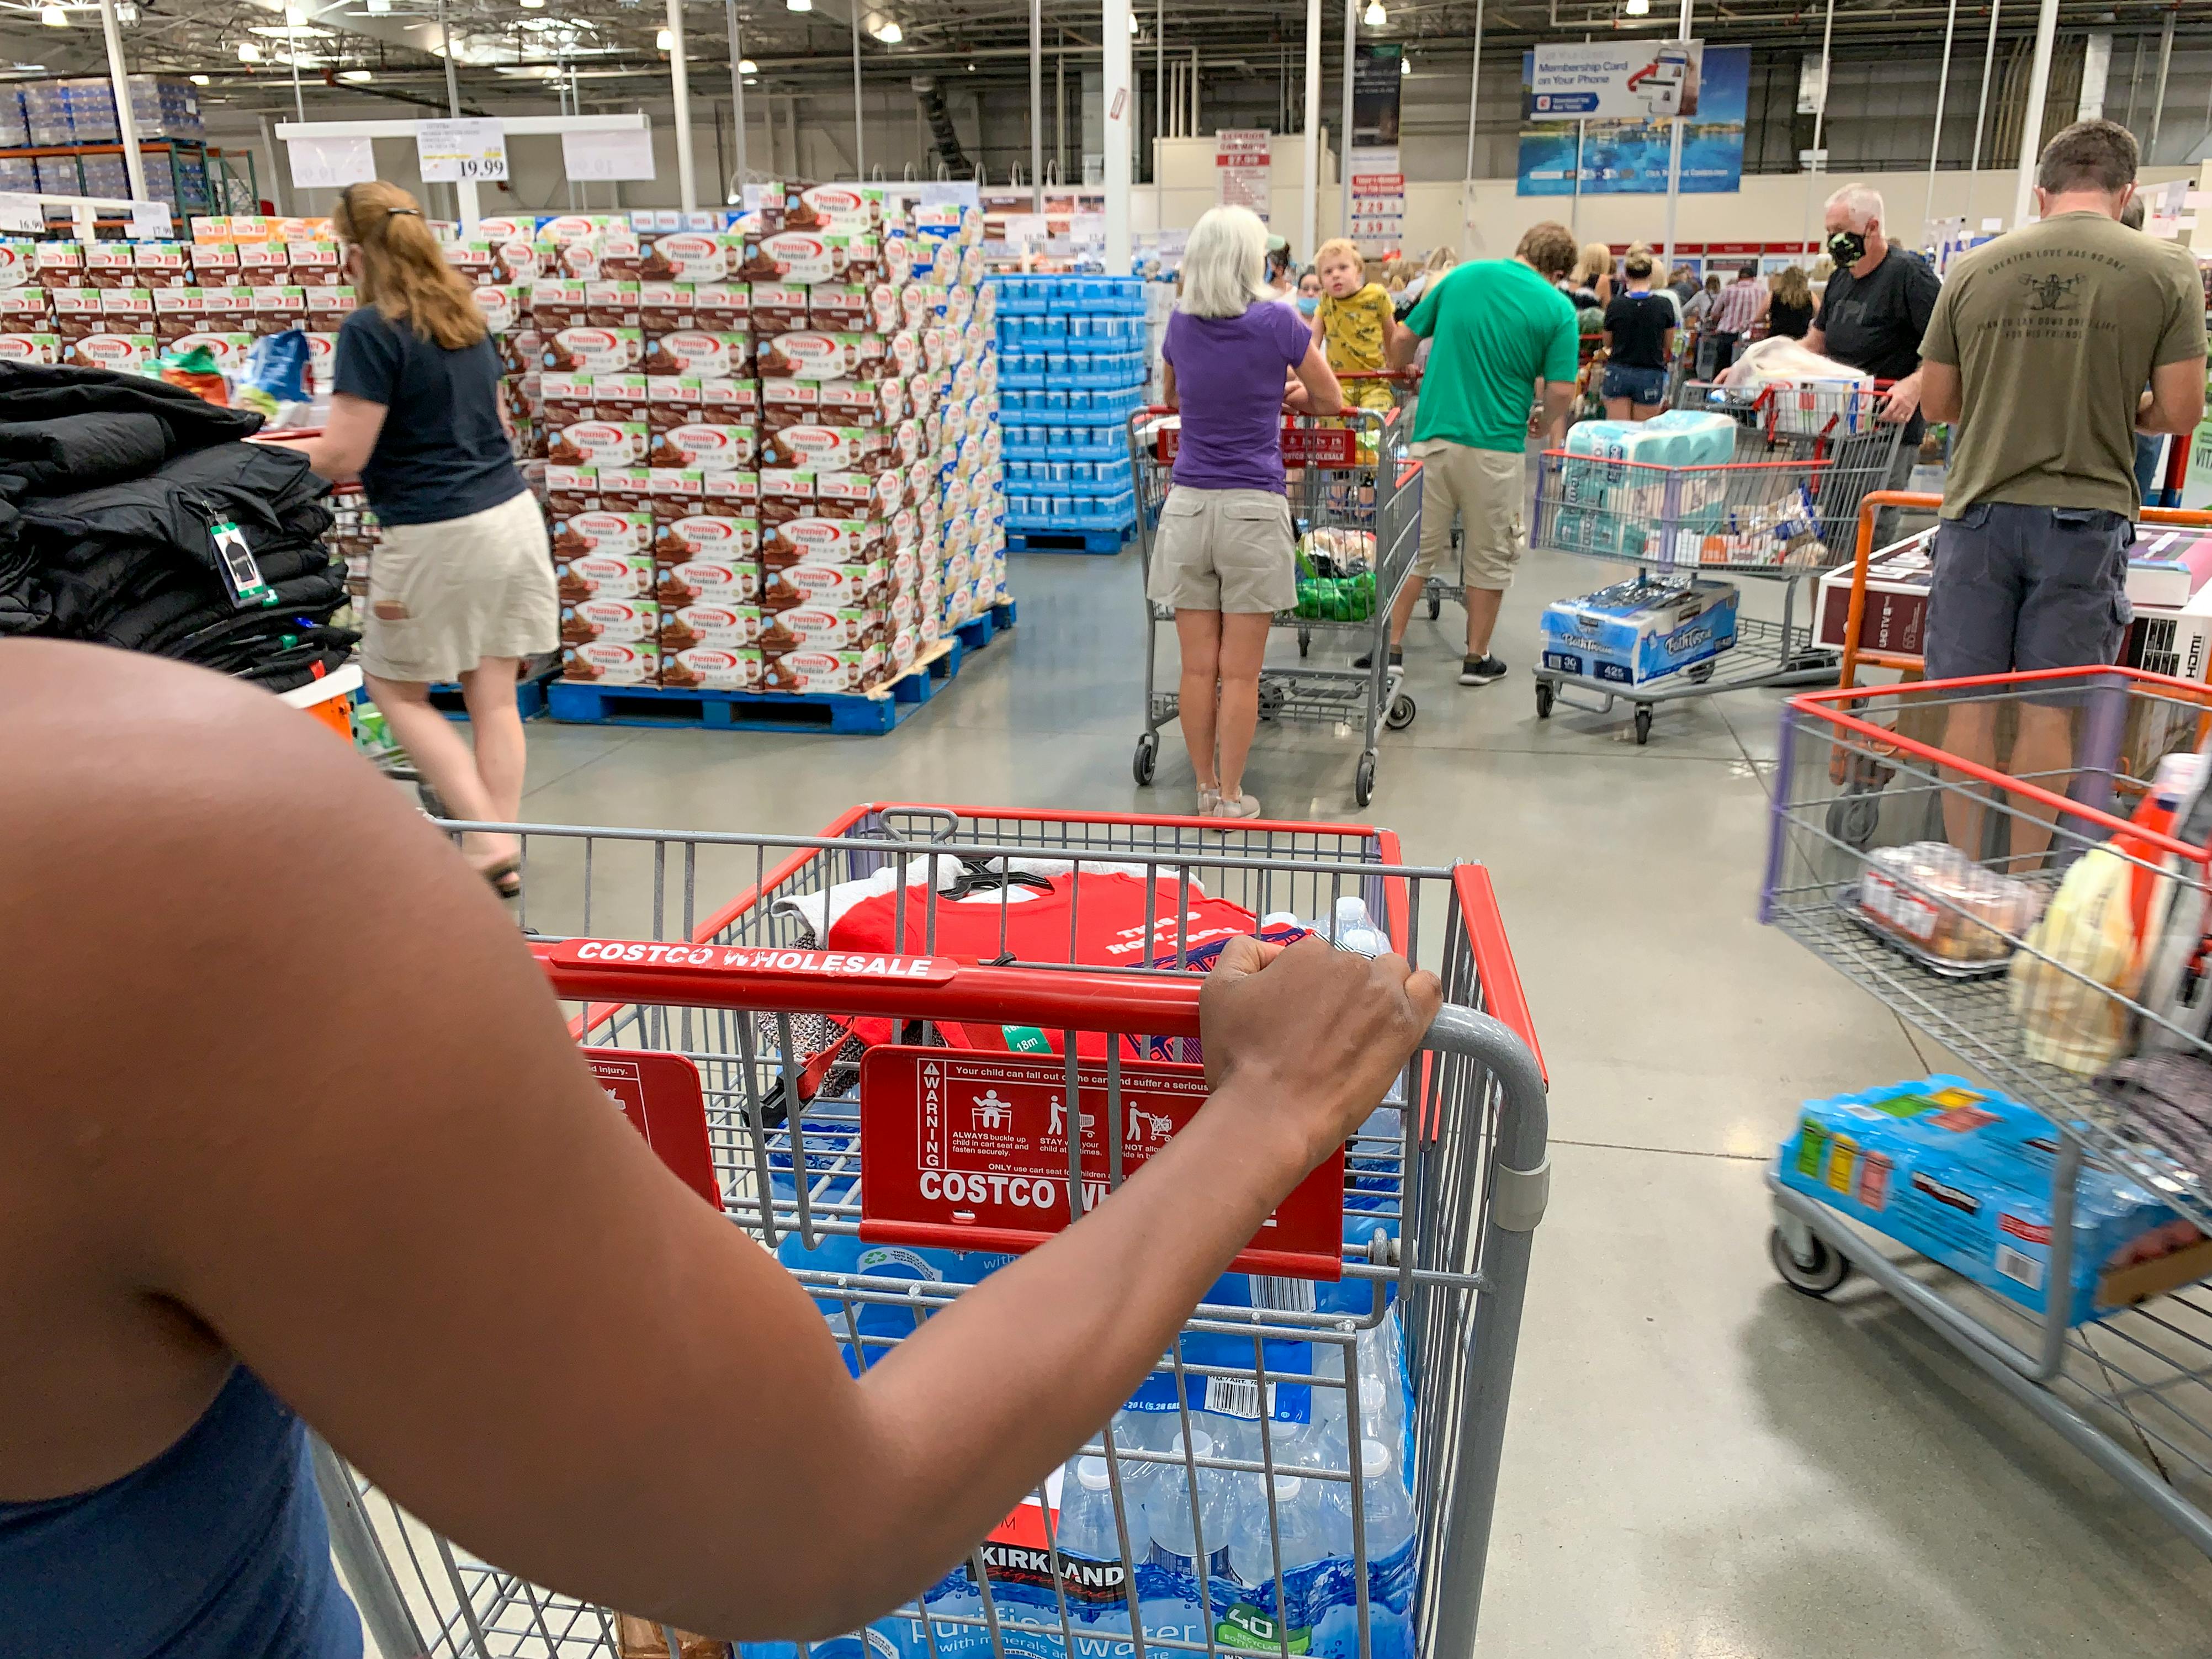 28 Costco Warehouse Savings Tips to Know The Krazy Coupon Lady